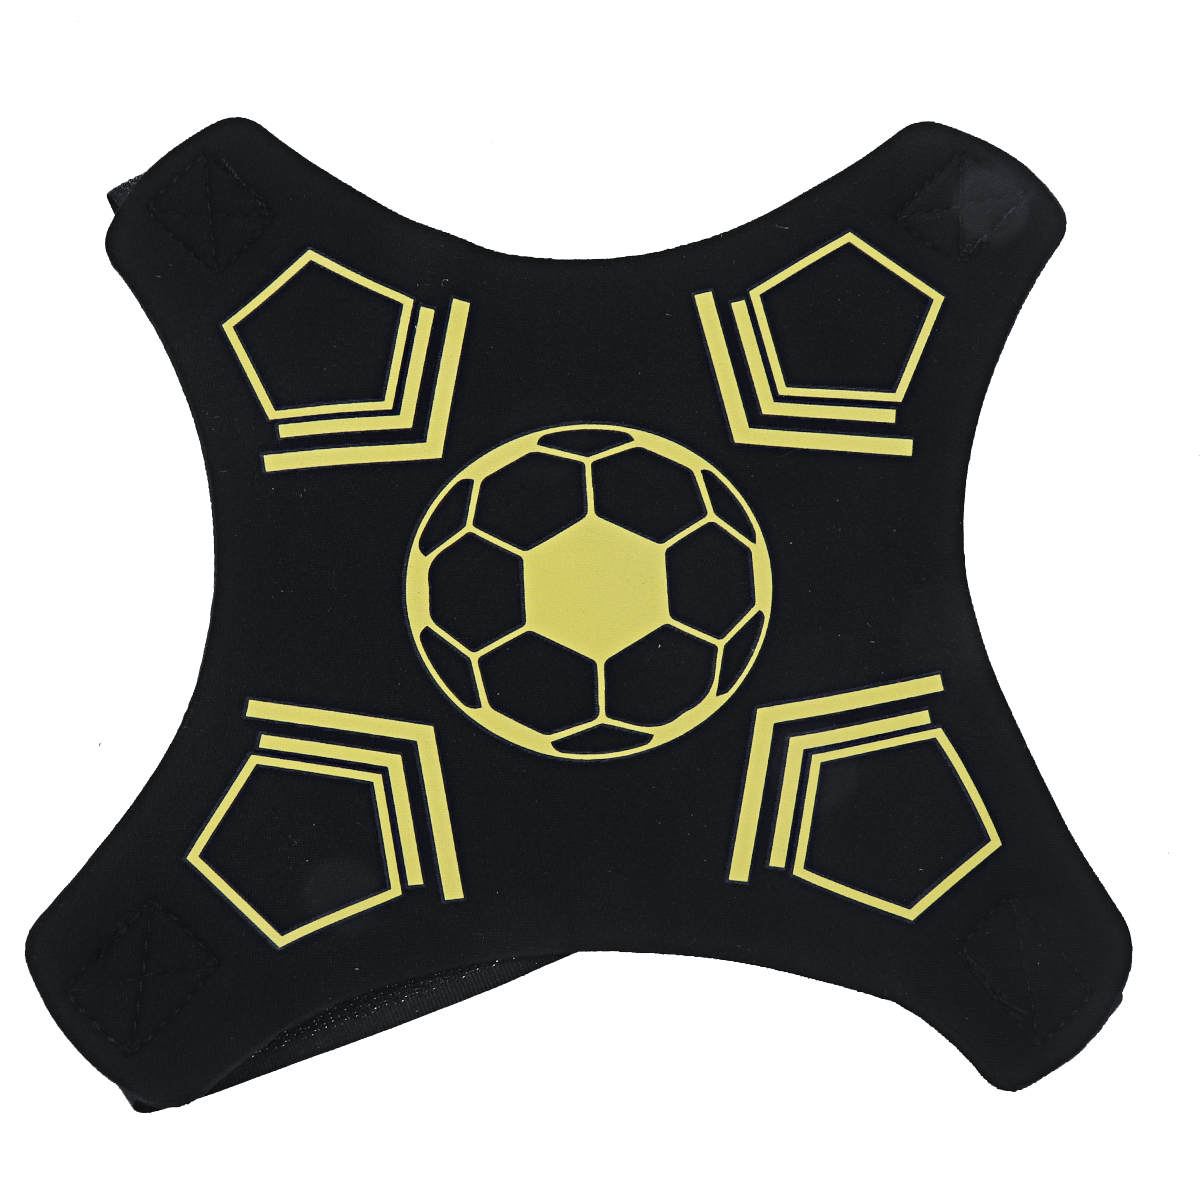 Youth-Soccer-Trainer-Hands-Free-Solo-SoccerVolleyballRugby-Trainer-Adjustable-Waist-Belt-Football-Tr-1727498-4